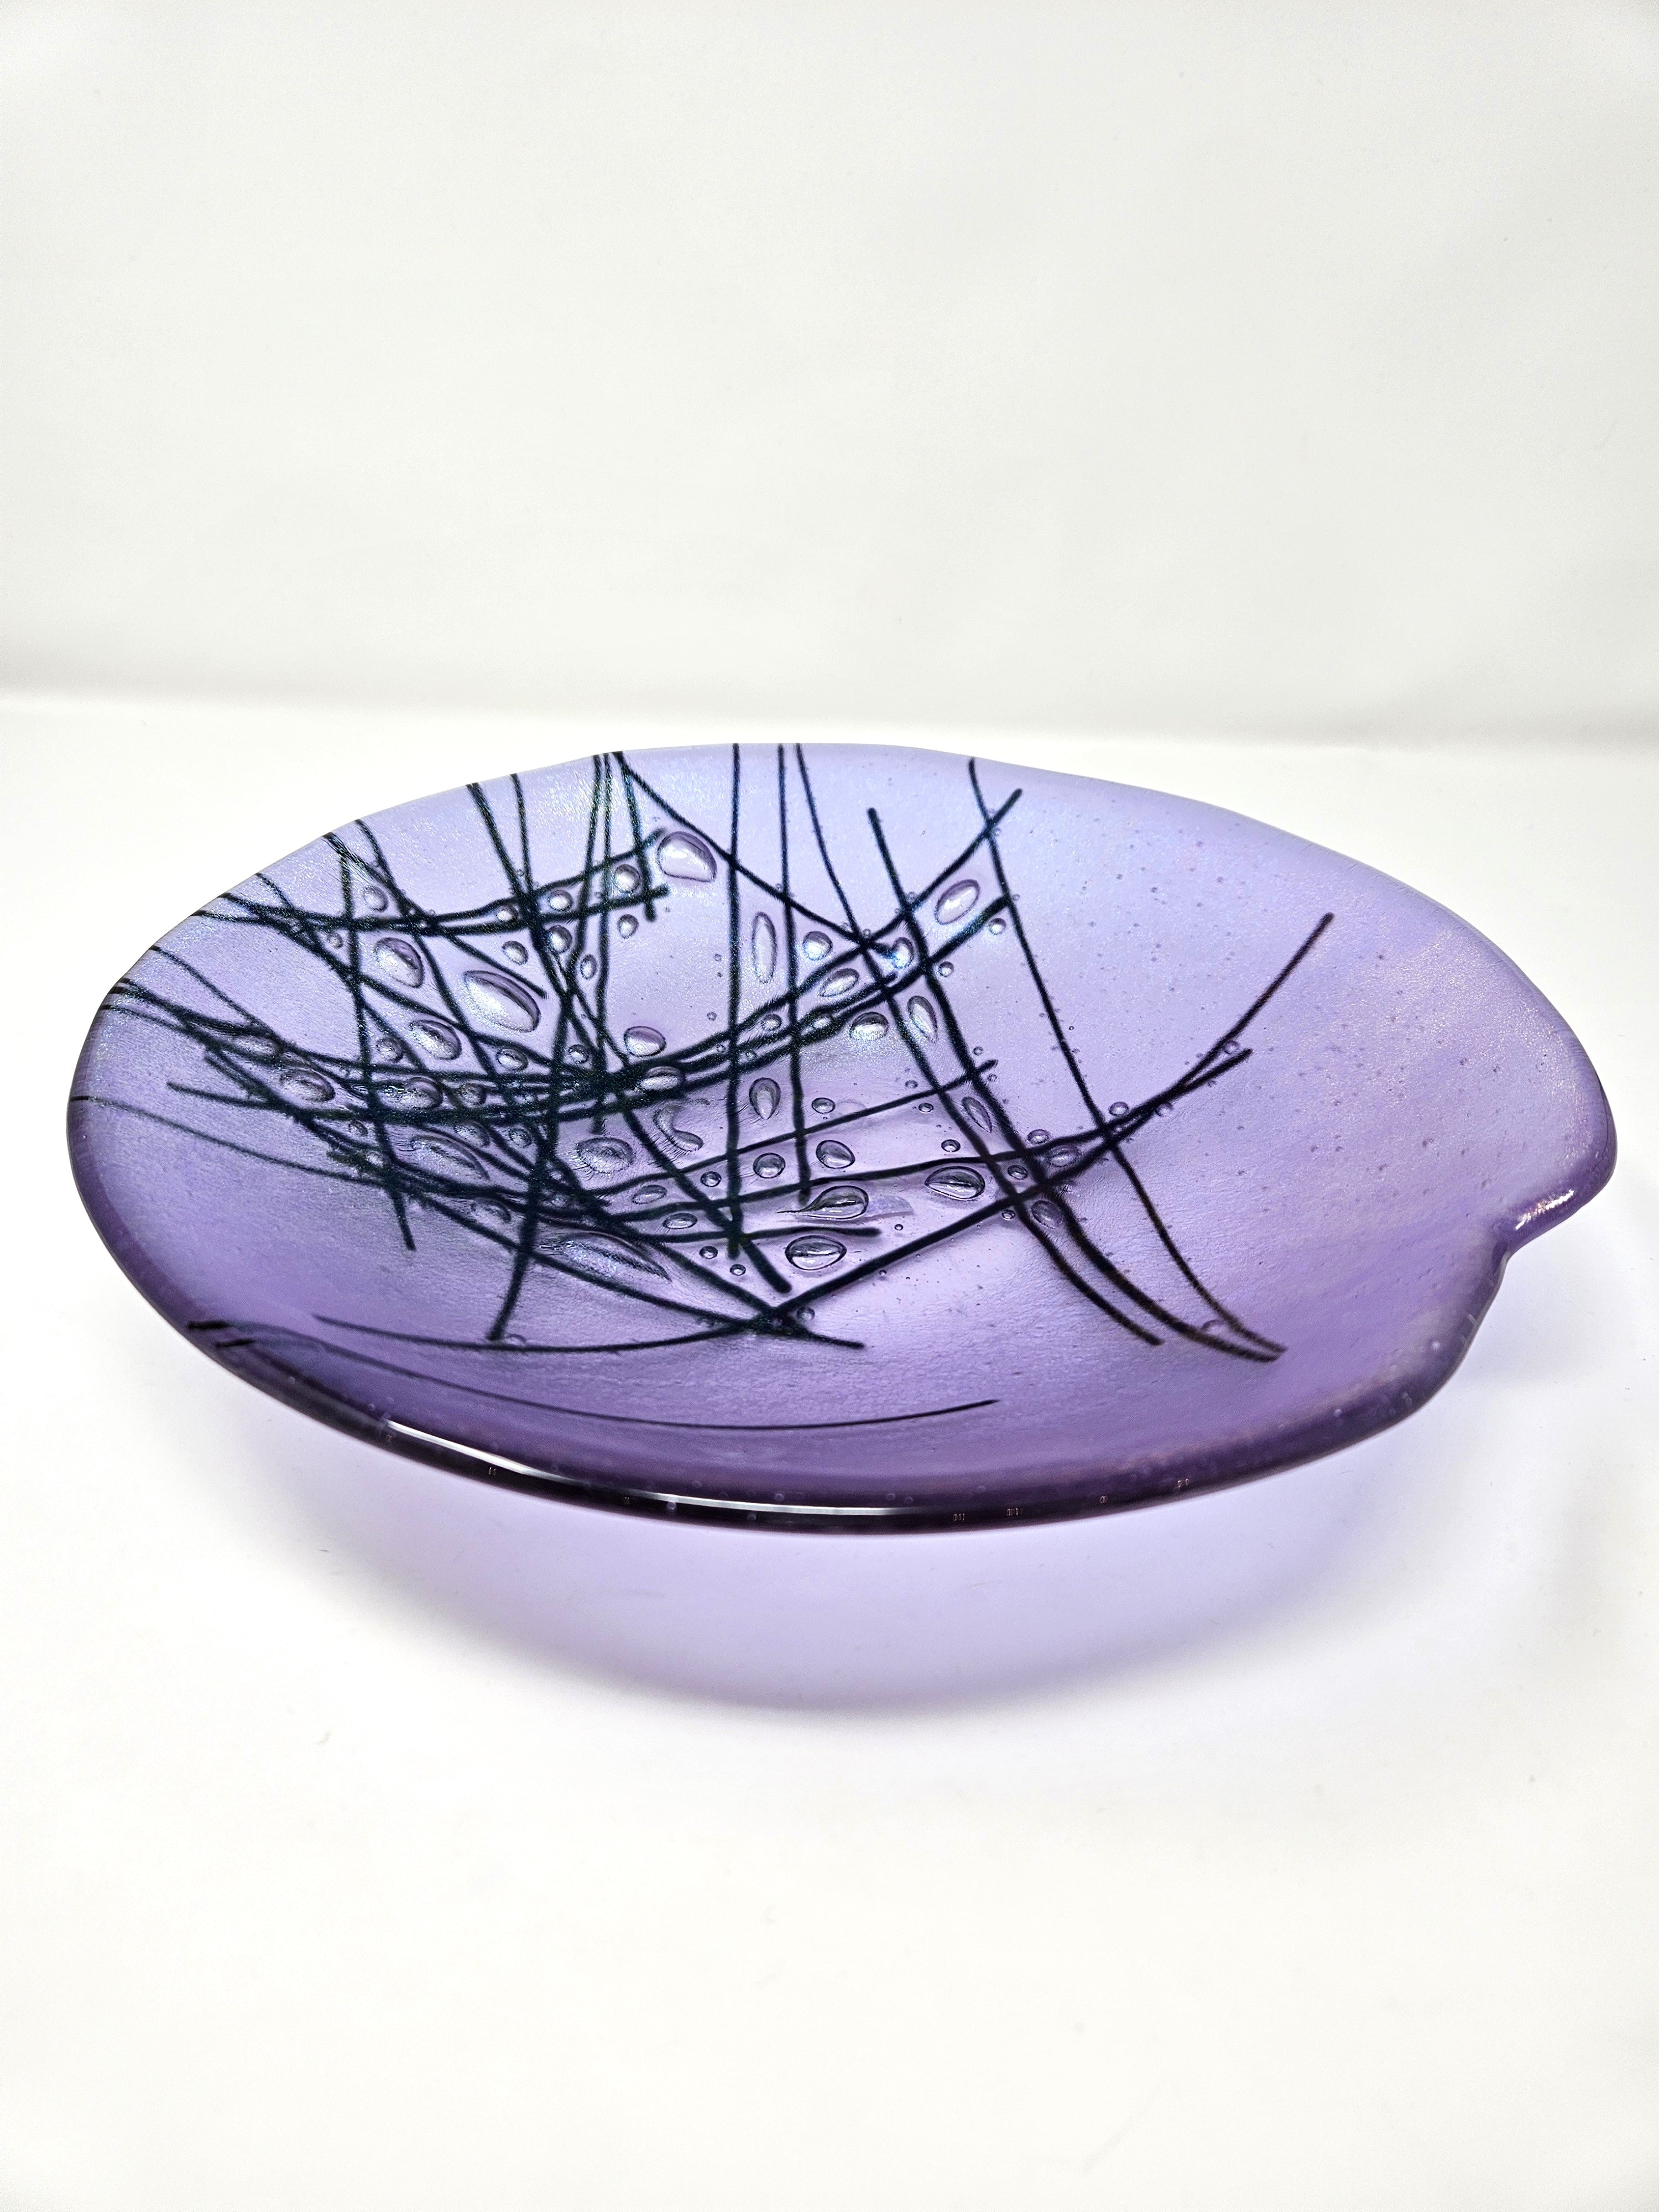 #153 Lilac Iridescent Fused Stringer Bowl by Mesolini Glass Studio